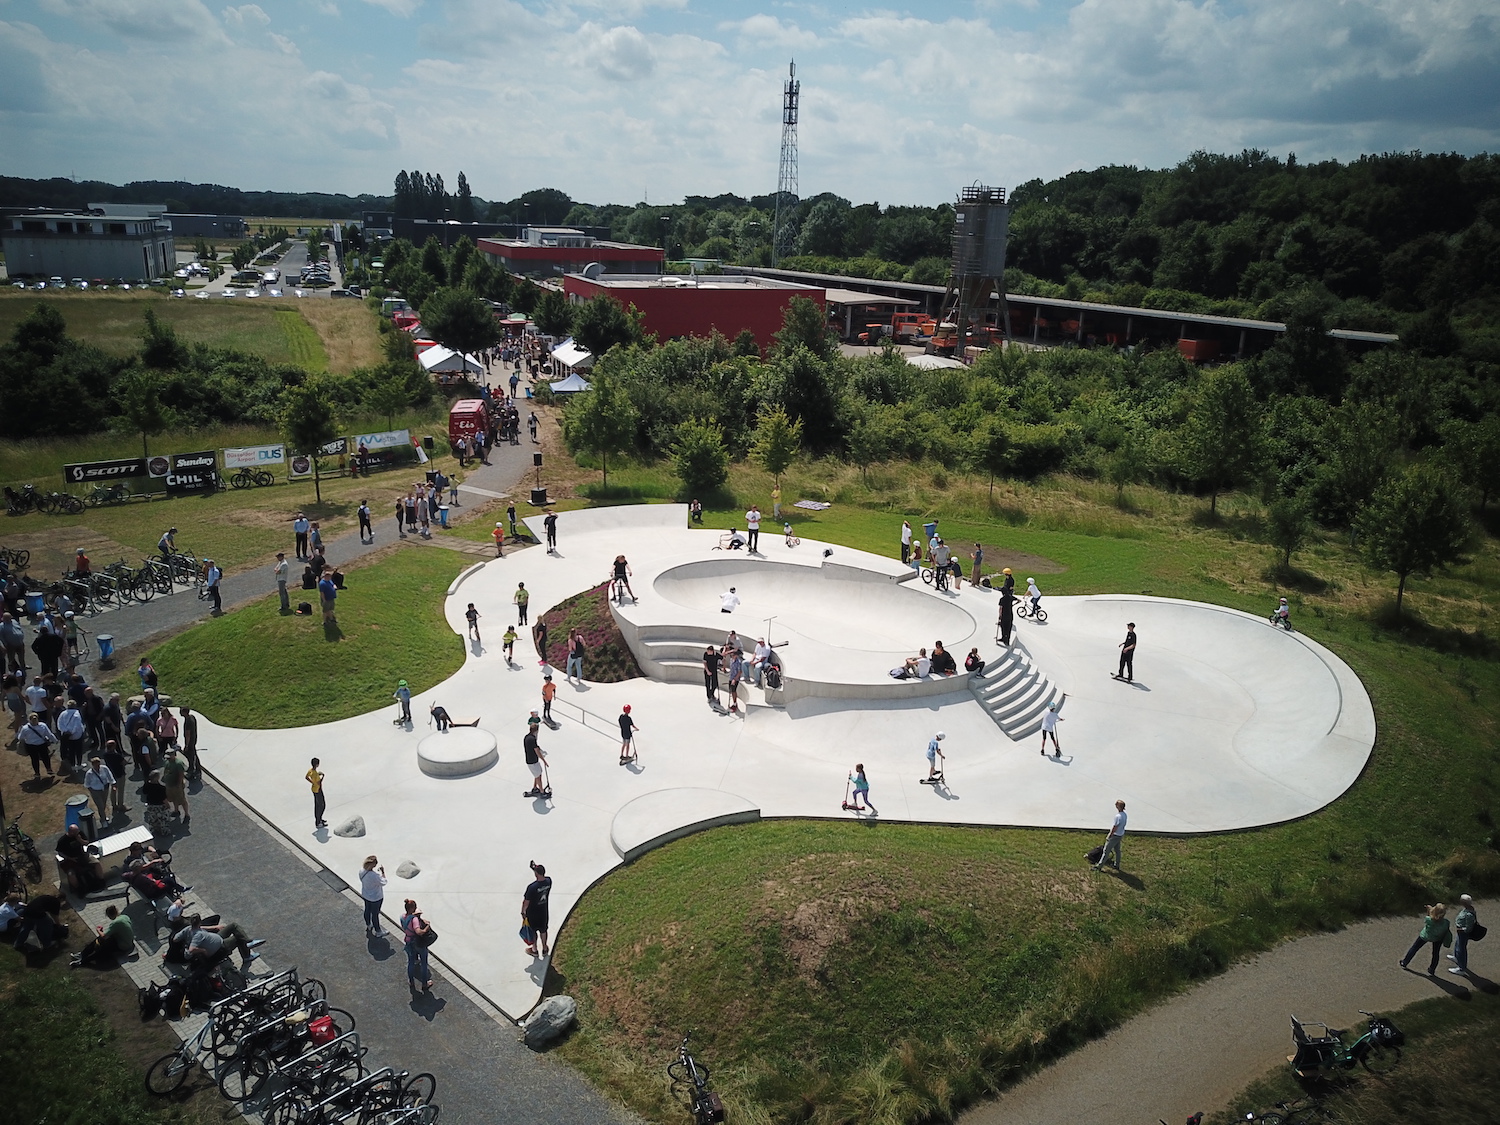 The new Meerbusch skatepark in Germany is officially open